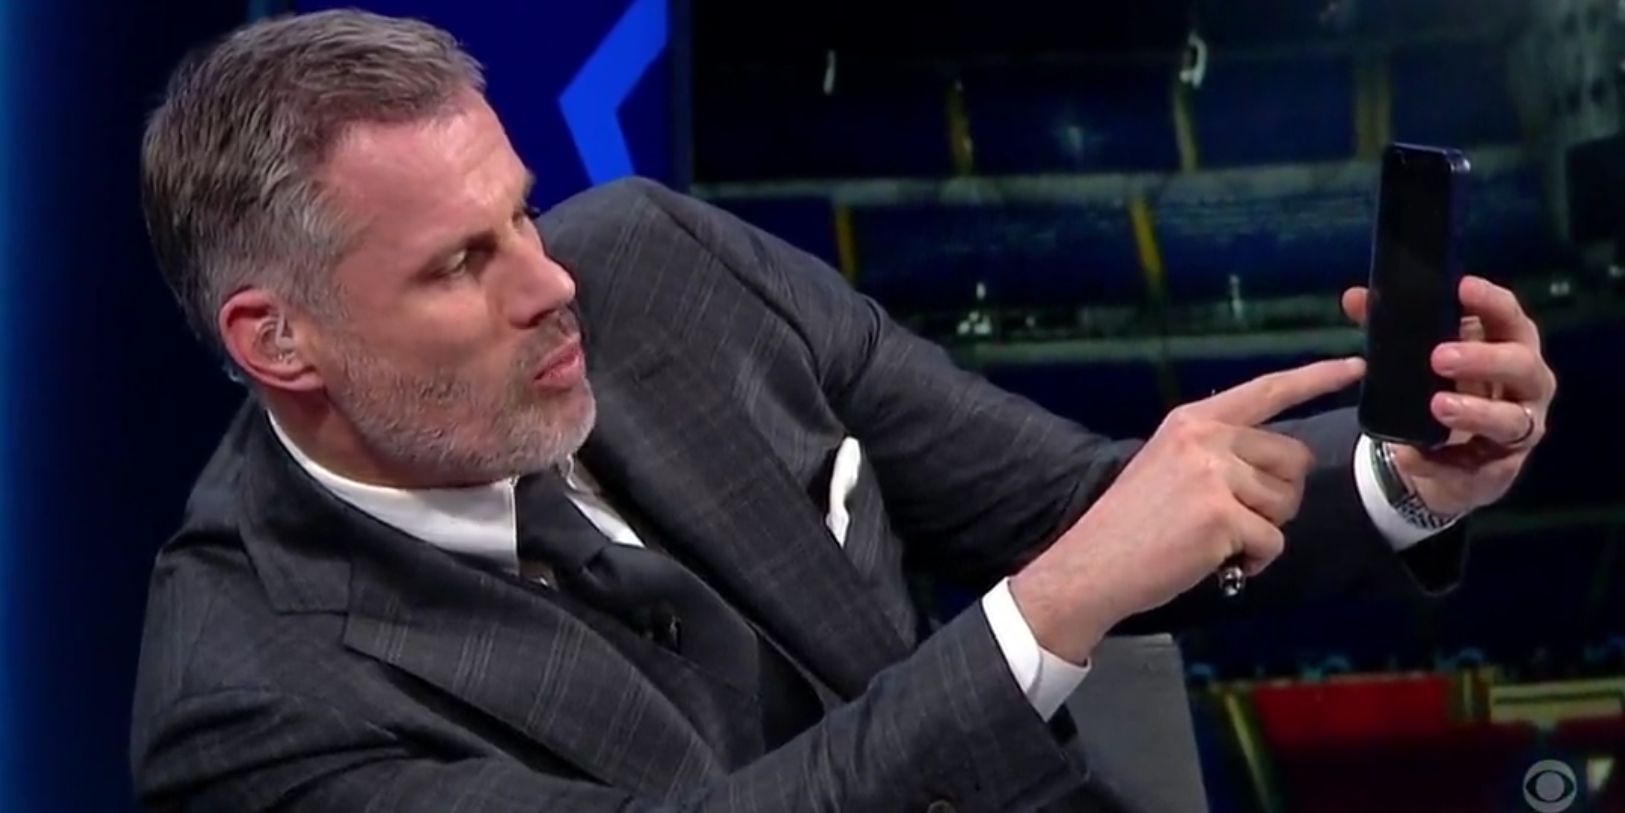 (Video) Jamie Carragher shares text with Morton and waxes lyrical over his Champions League San Siro performance